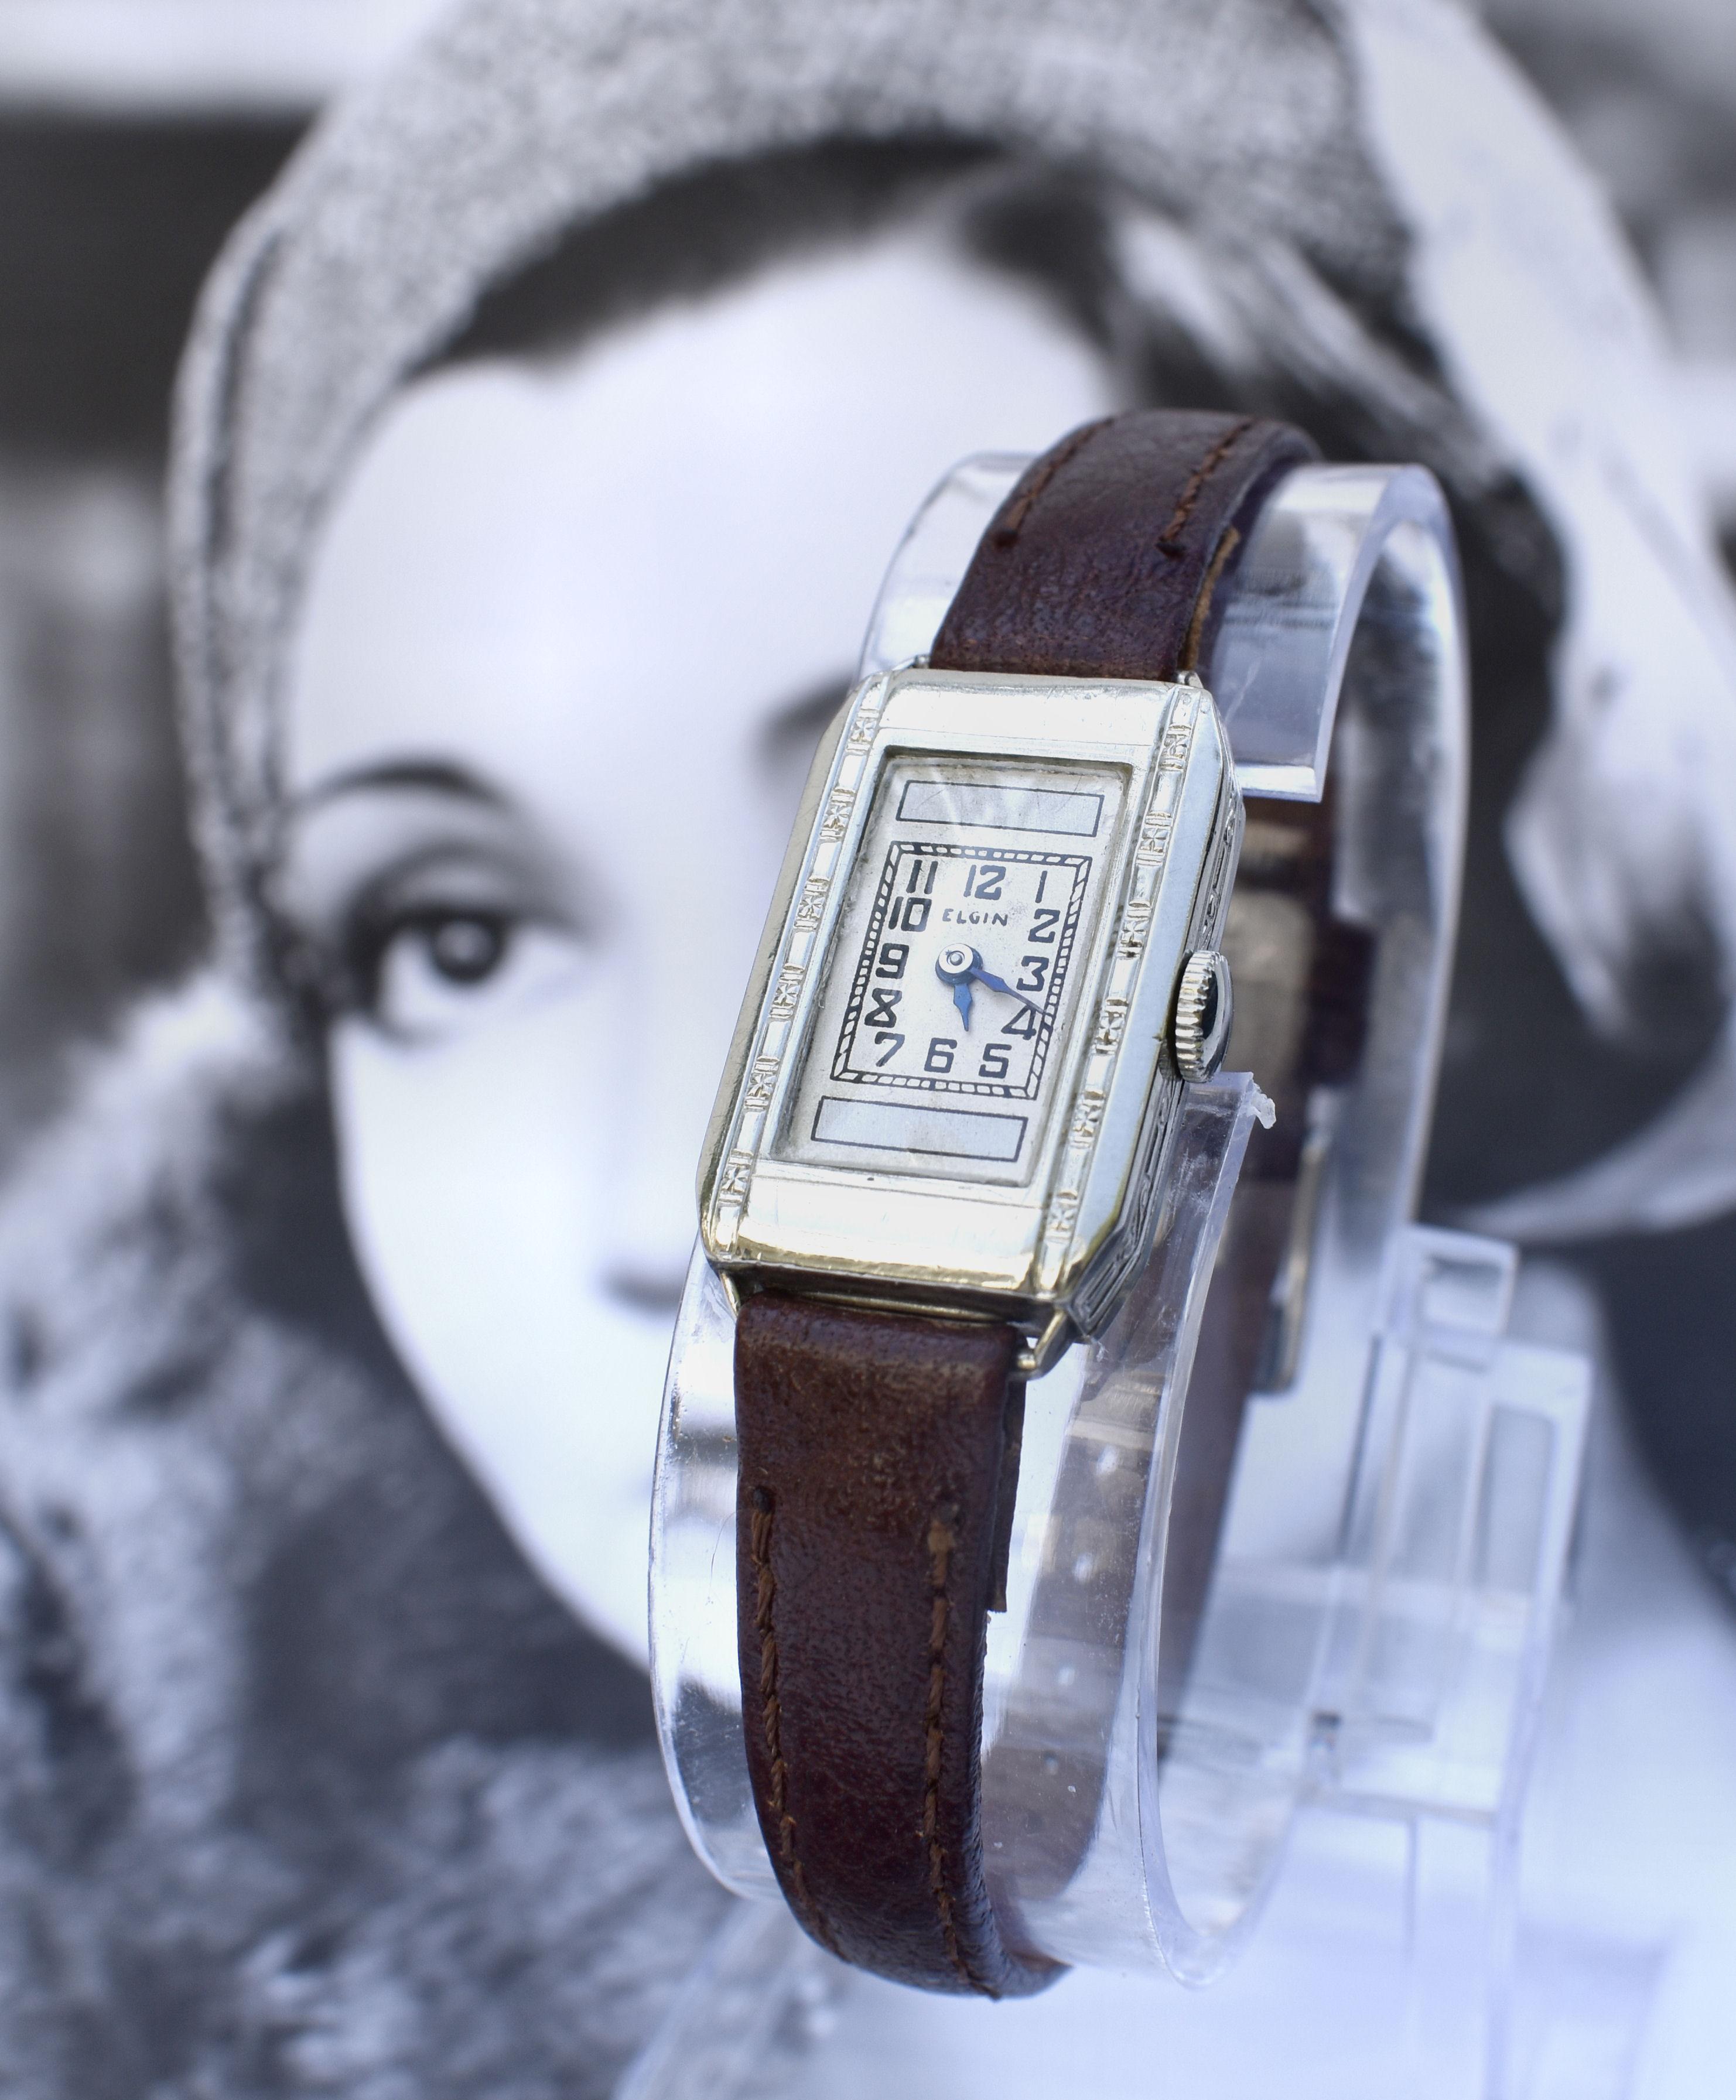 For your consideration is this lovely Art Deco ladies wrist watch which looks great for both evening and day dress. Made by the US watchmakers company Elgin the serial number dates it to 1935, so 87 years old. The movement is 15 jewel manual wind